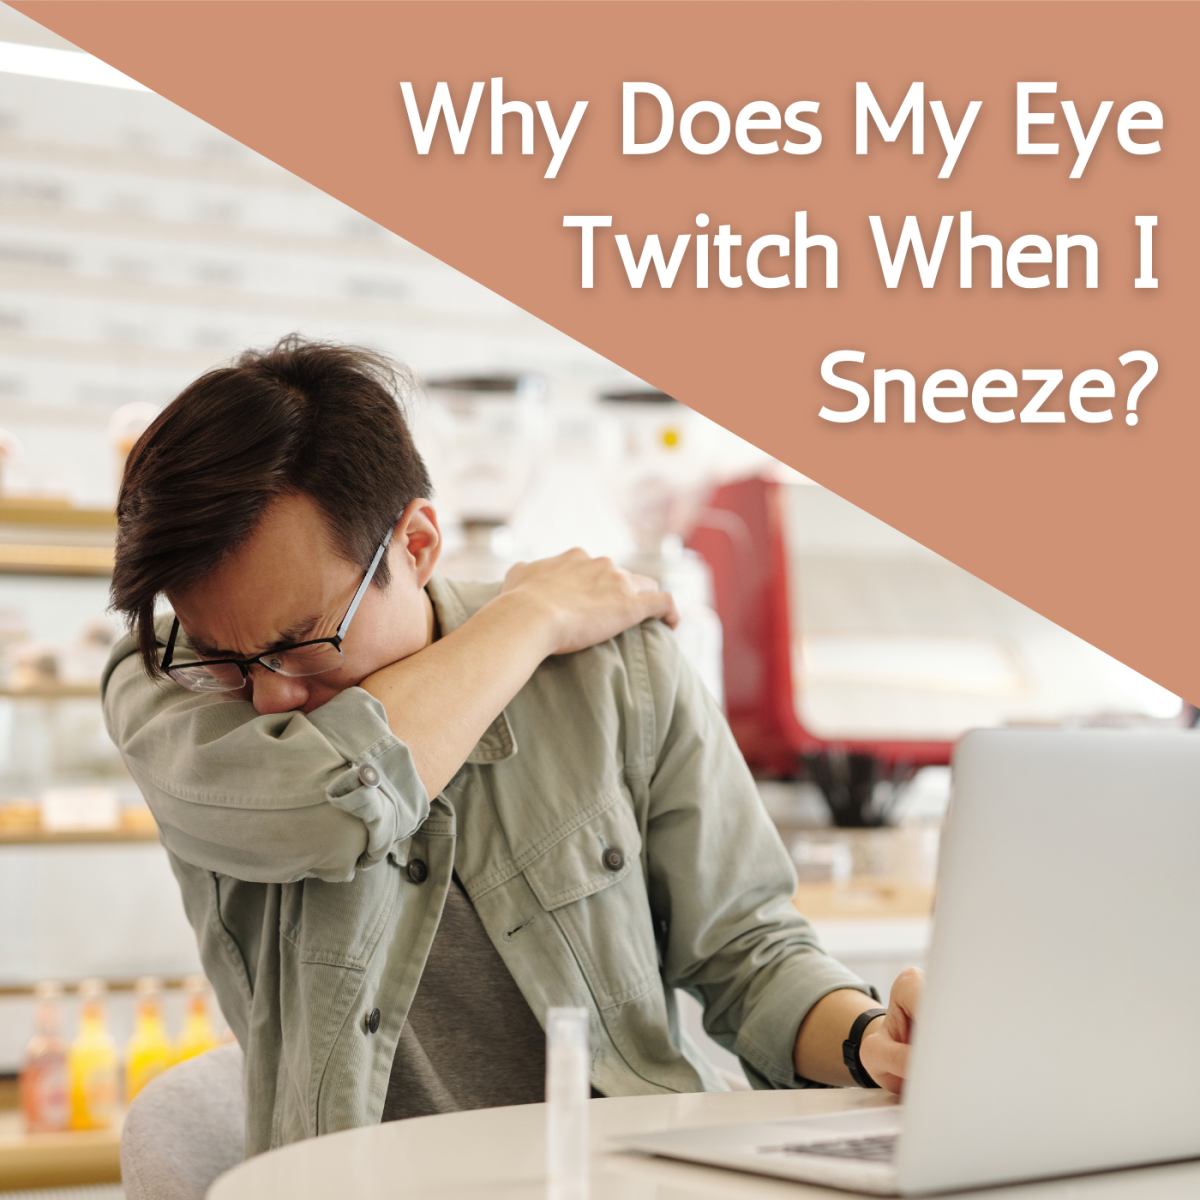 Why Does My Eye Twitch When I Sneeze?